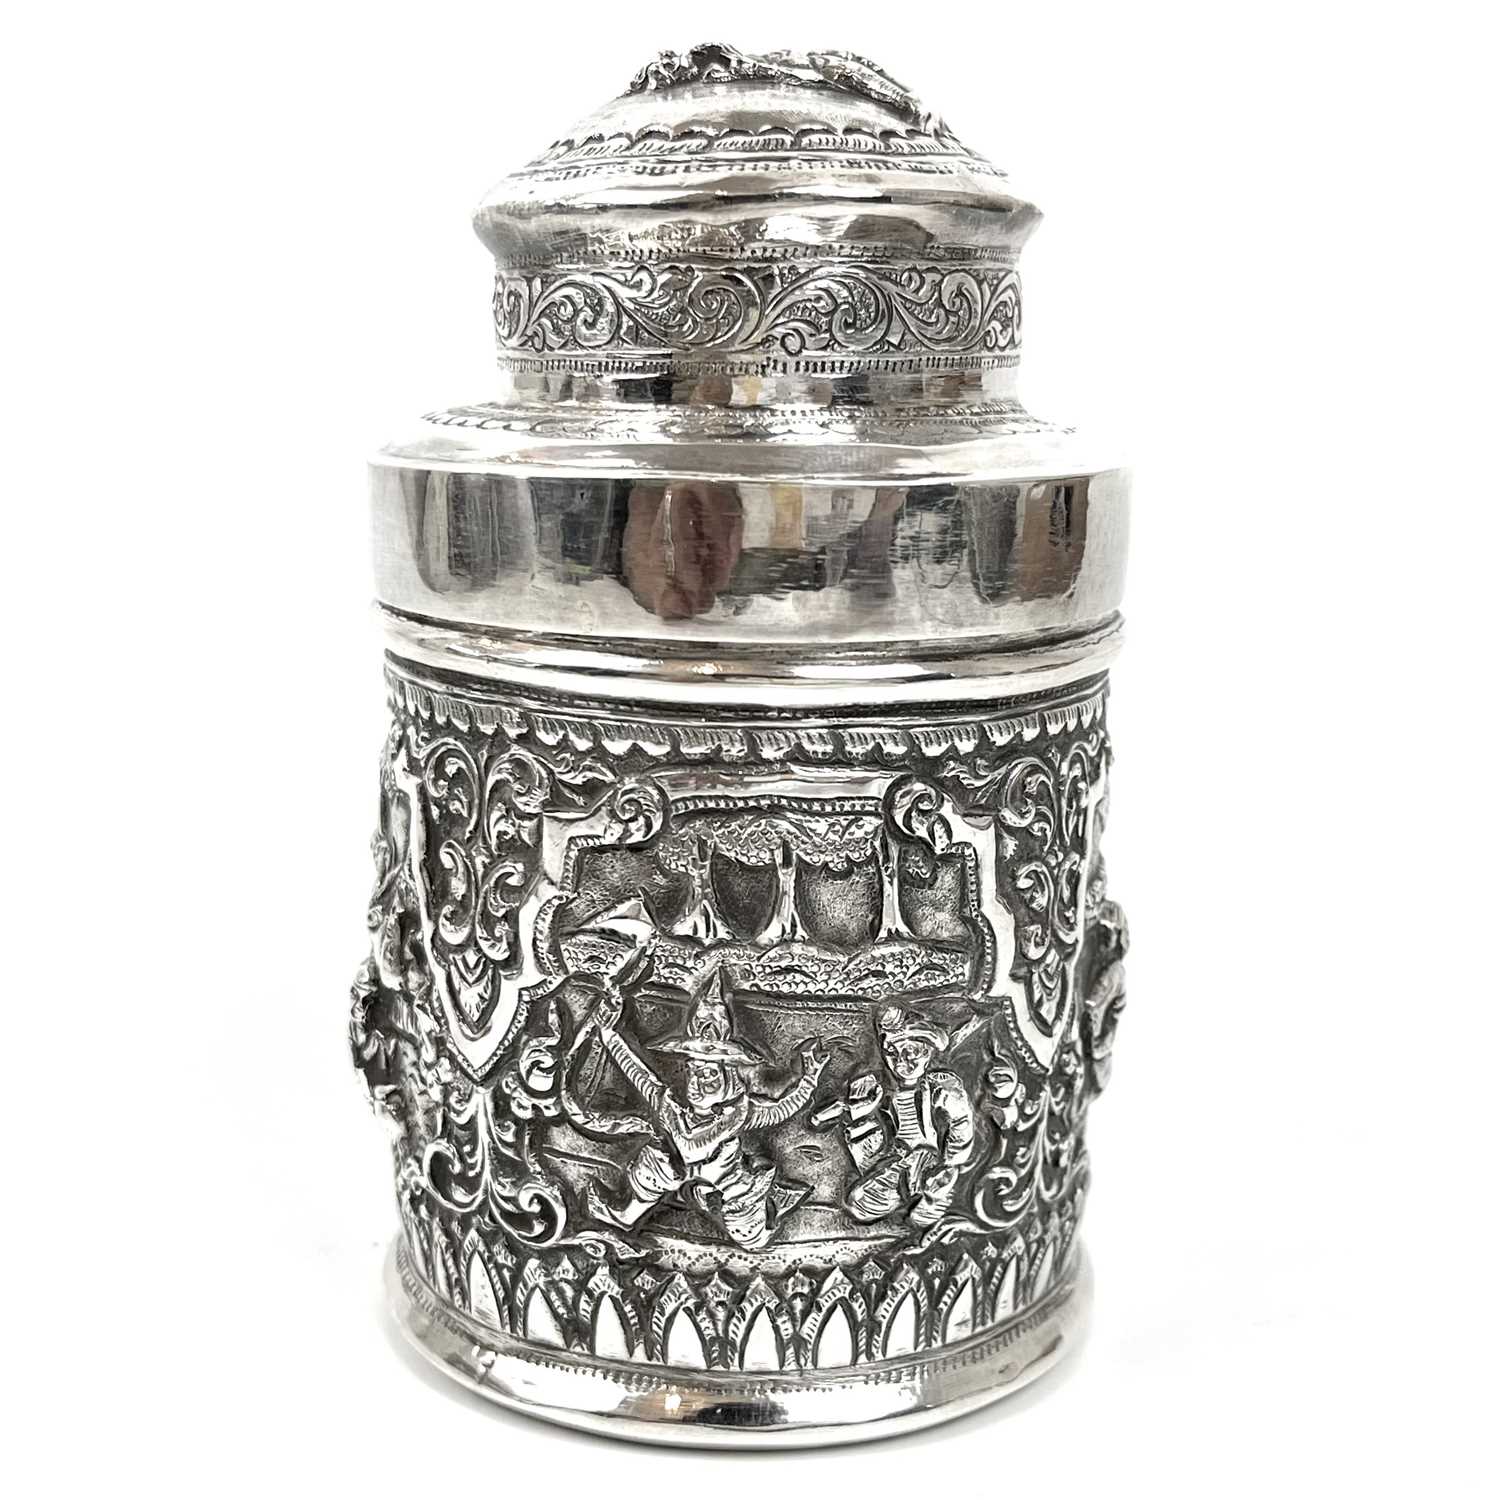 Two Burmese silver lidded cannisters, mid 20th century - Image 9 of 25